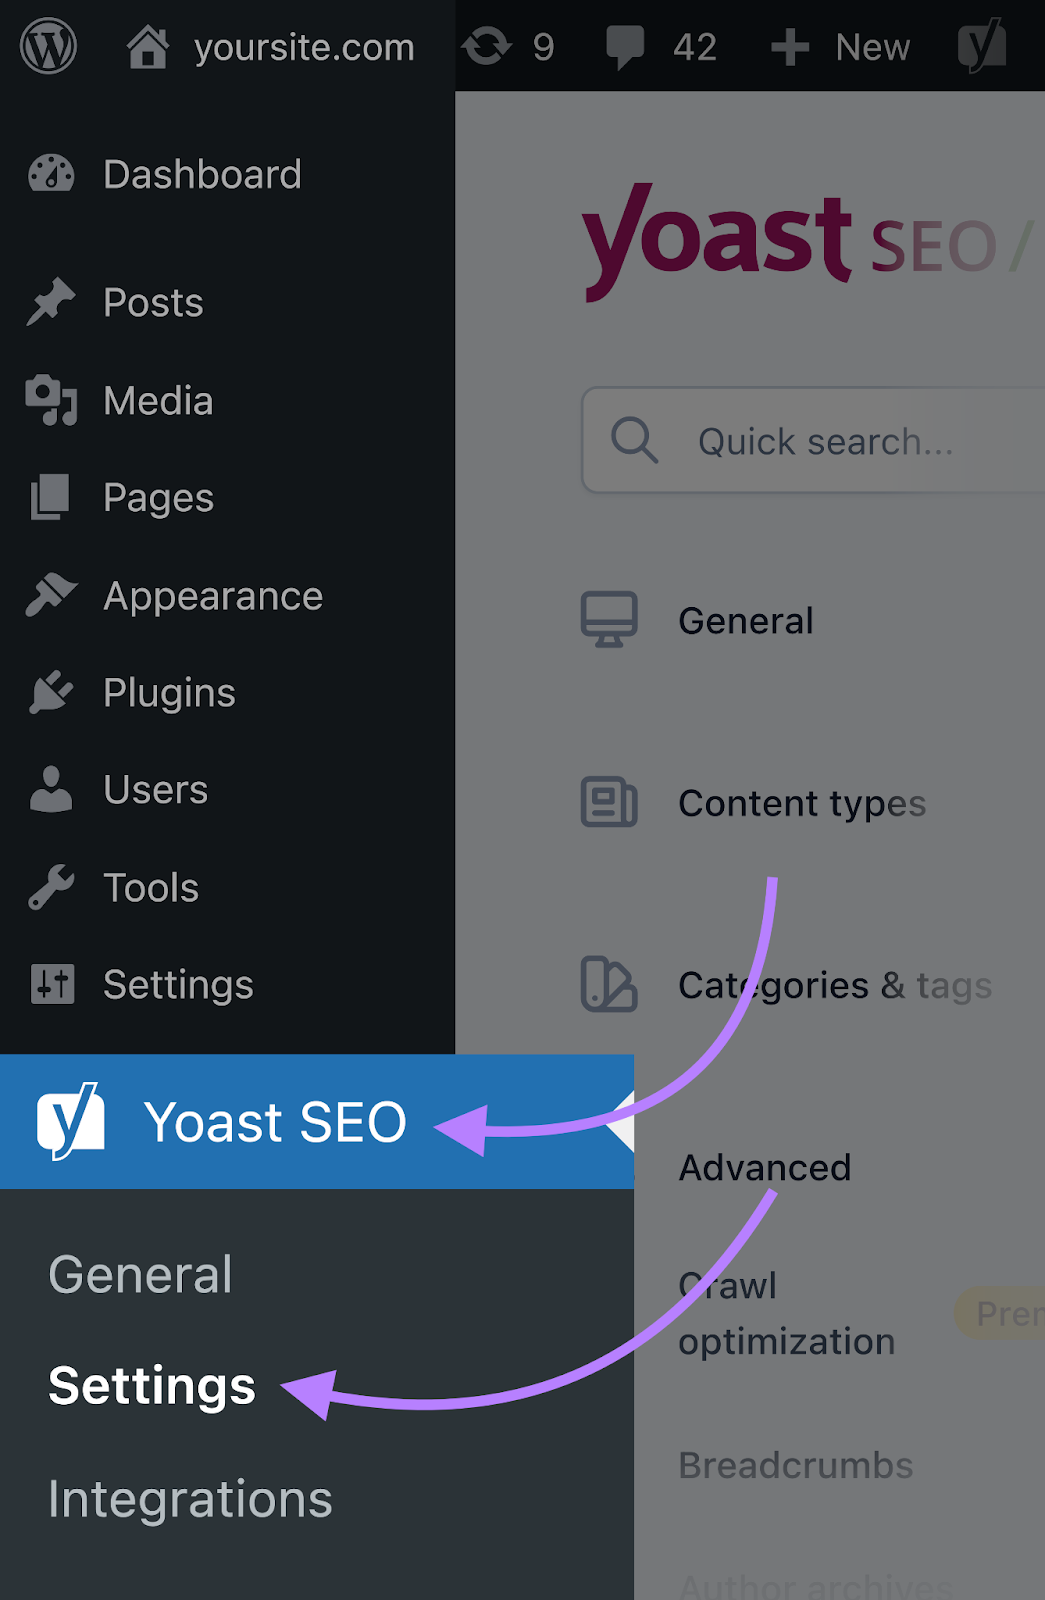 "Settings" selected under Yoast SEO section